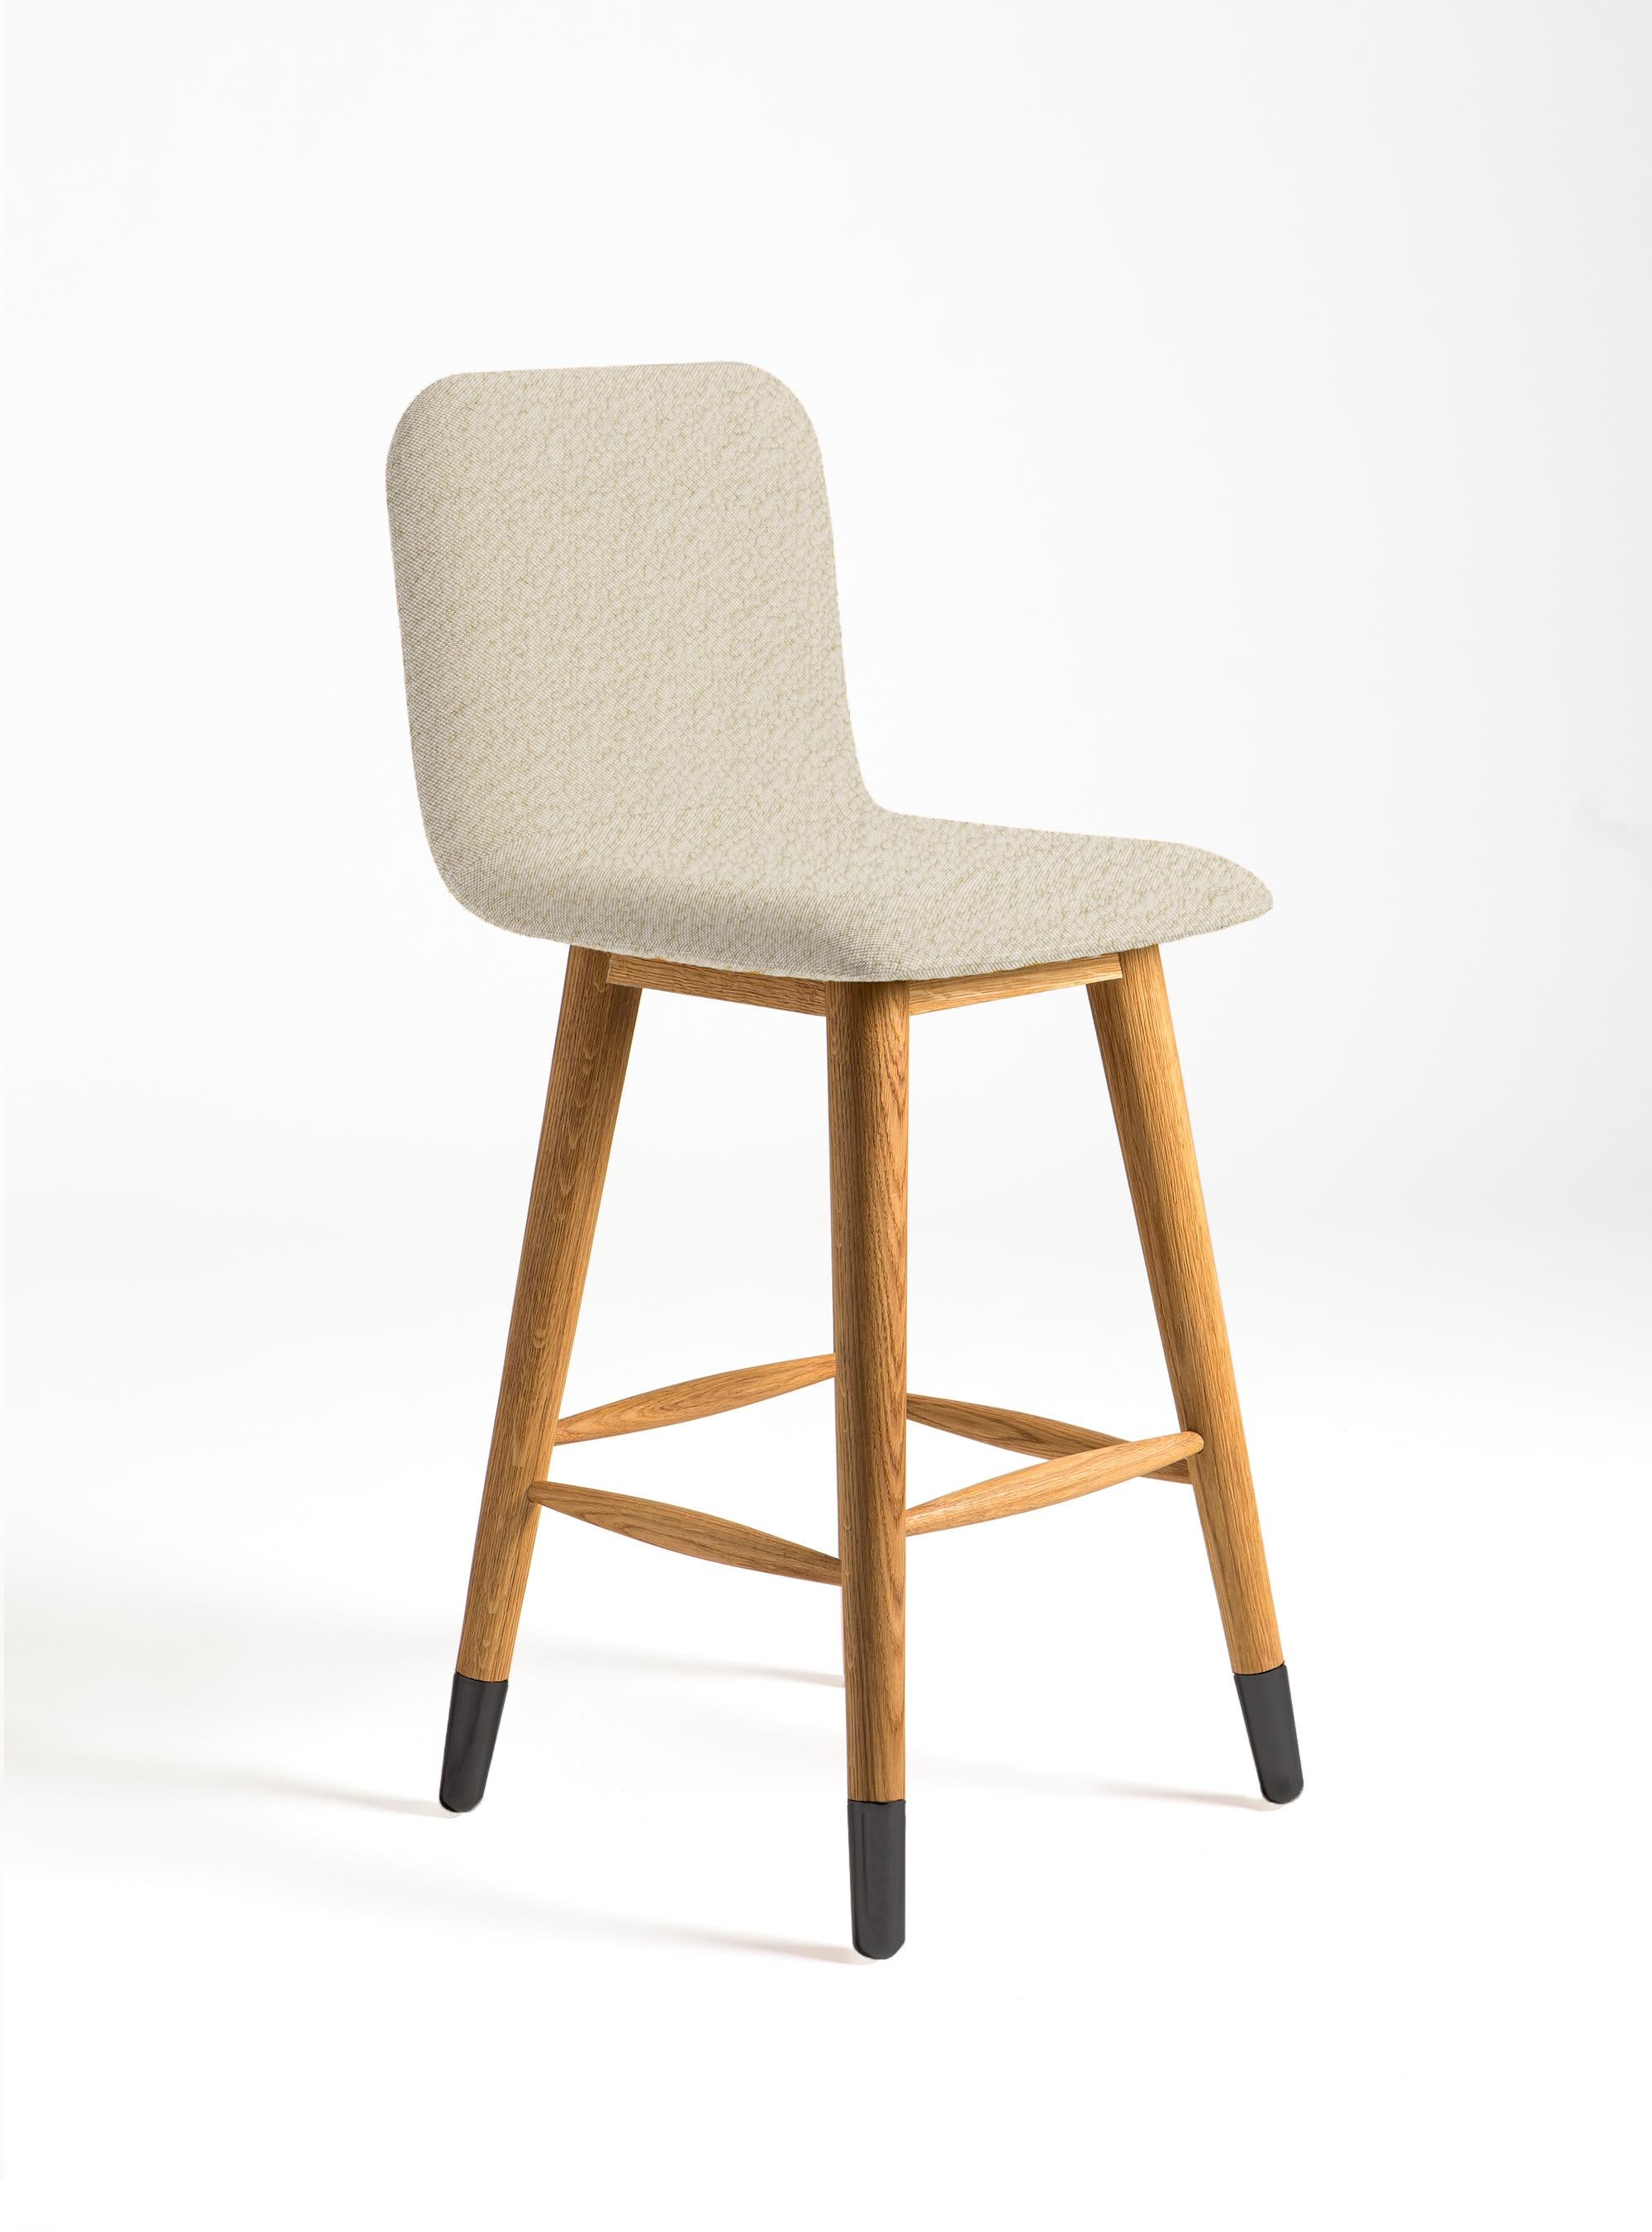 Mistral bar stool is designed to bring fresh, modern, natural style to its environment. Black polished metal and American white oak legs are combined with elegant white boucle fabric.